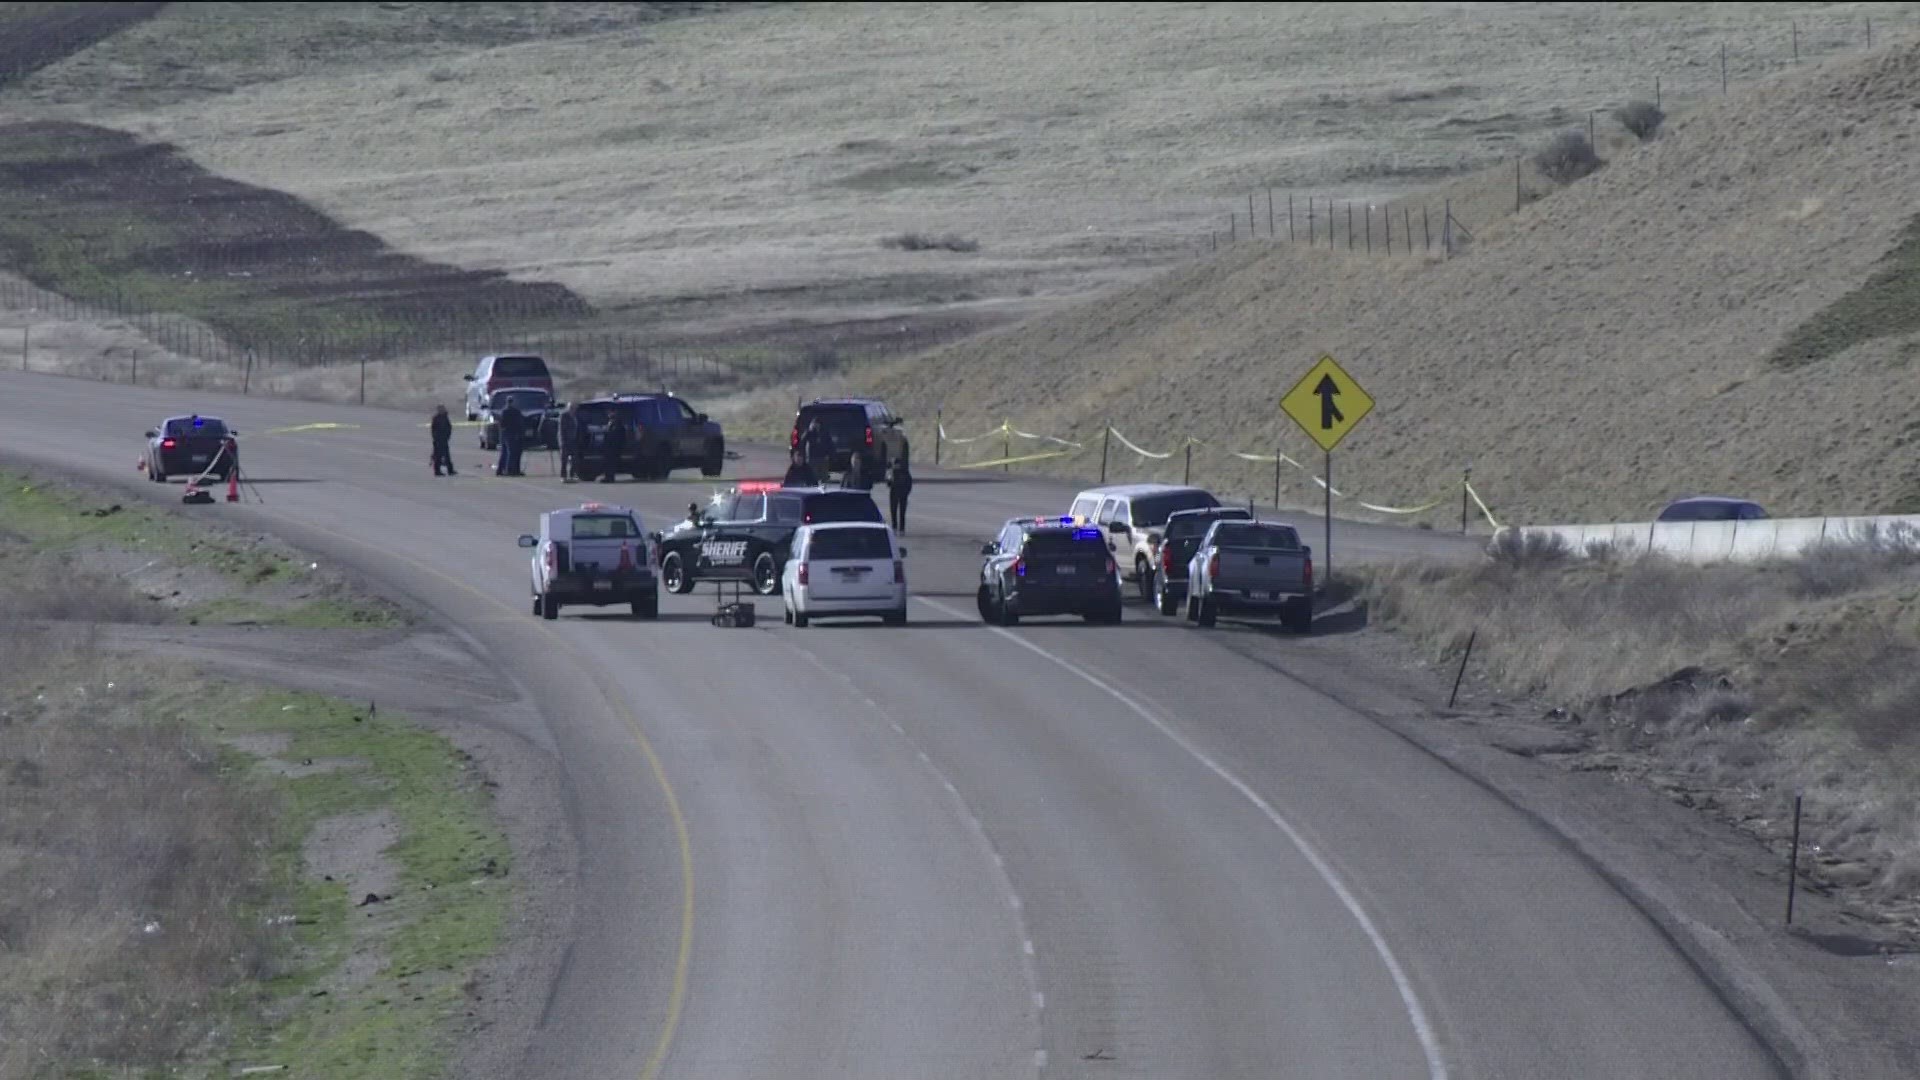 The deputy has undergone multiple surgeries and remains hospitalized after being stabbed on I-84 near Eisenman Road, the Ada County Sheriff's Office said.